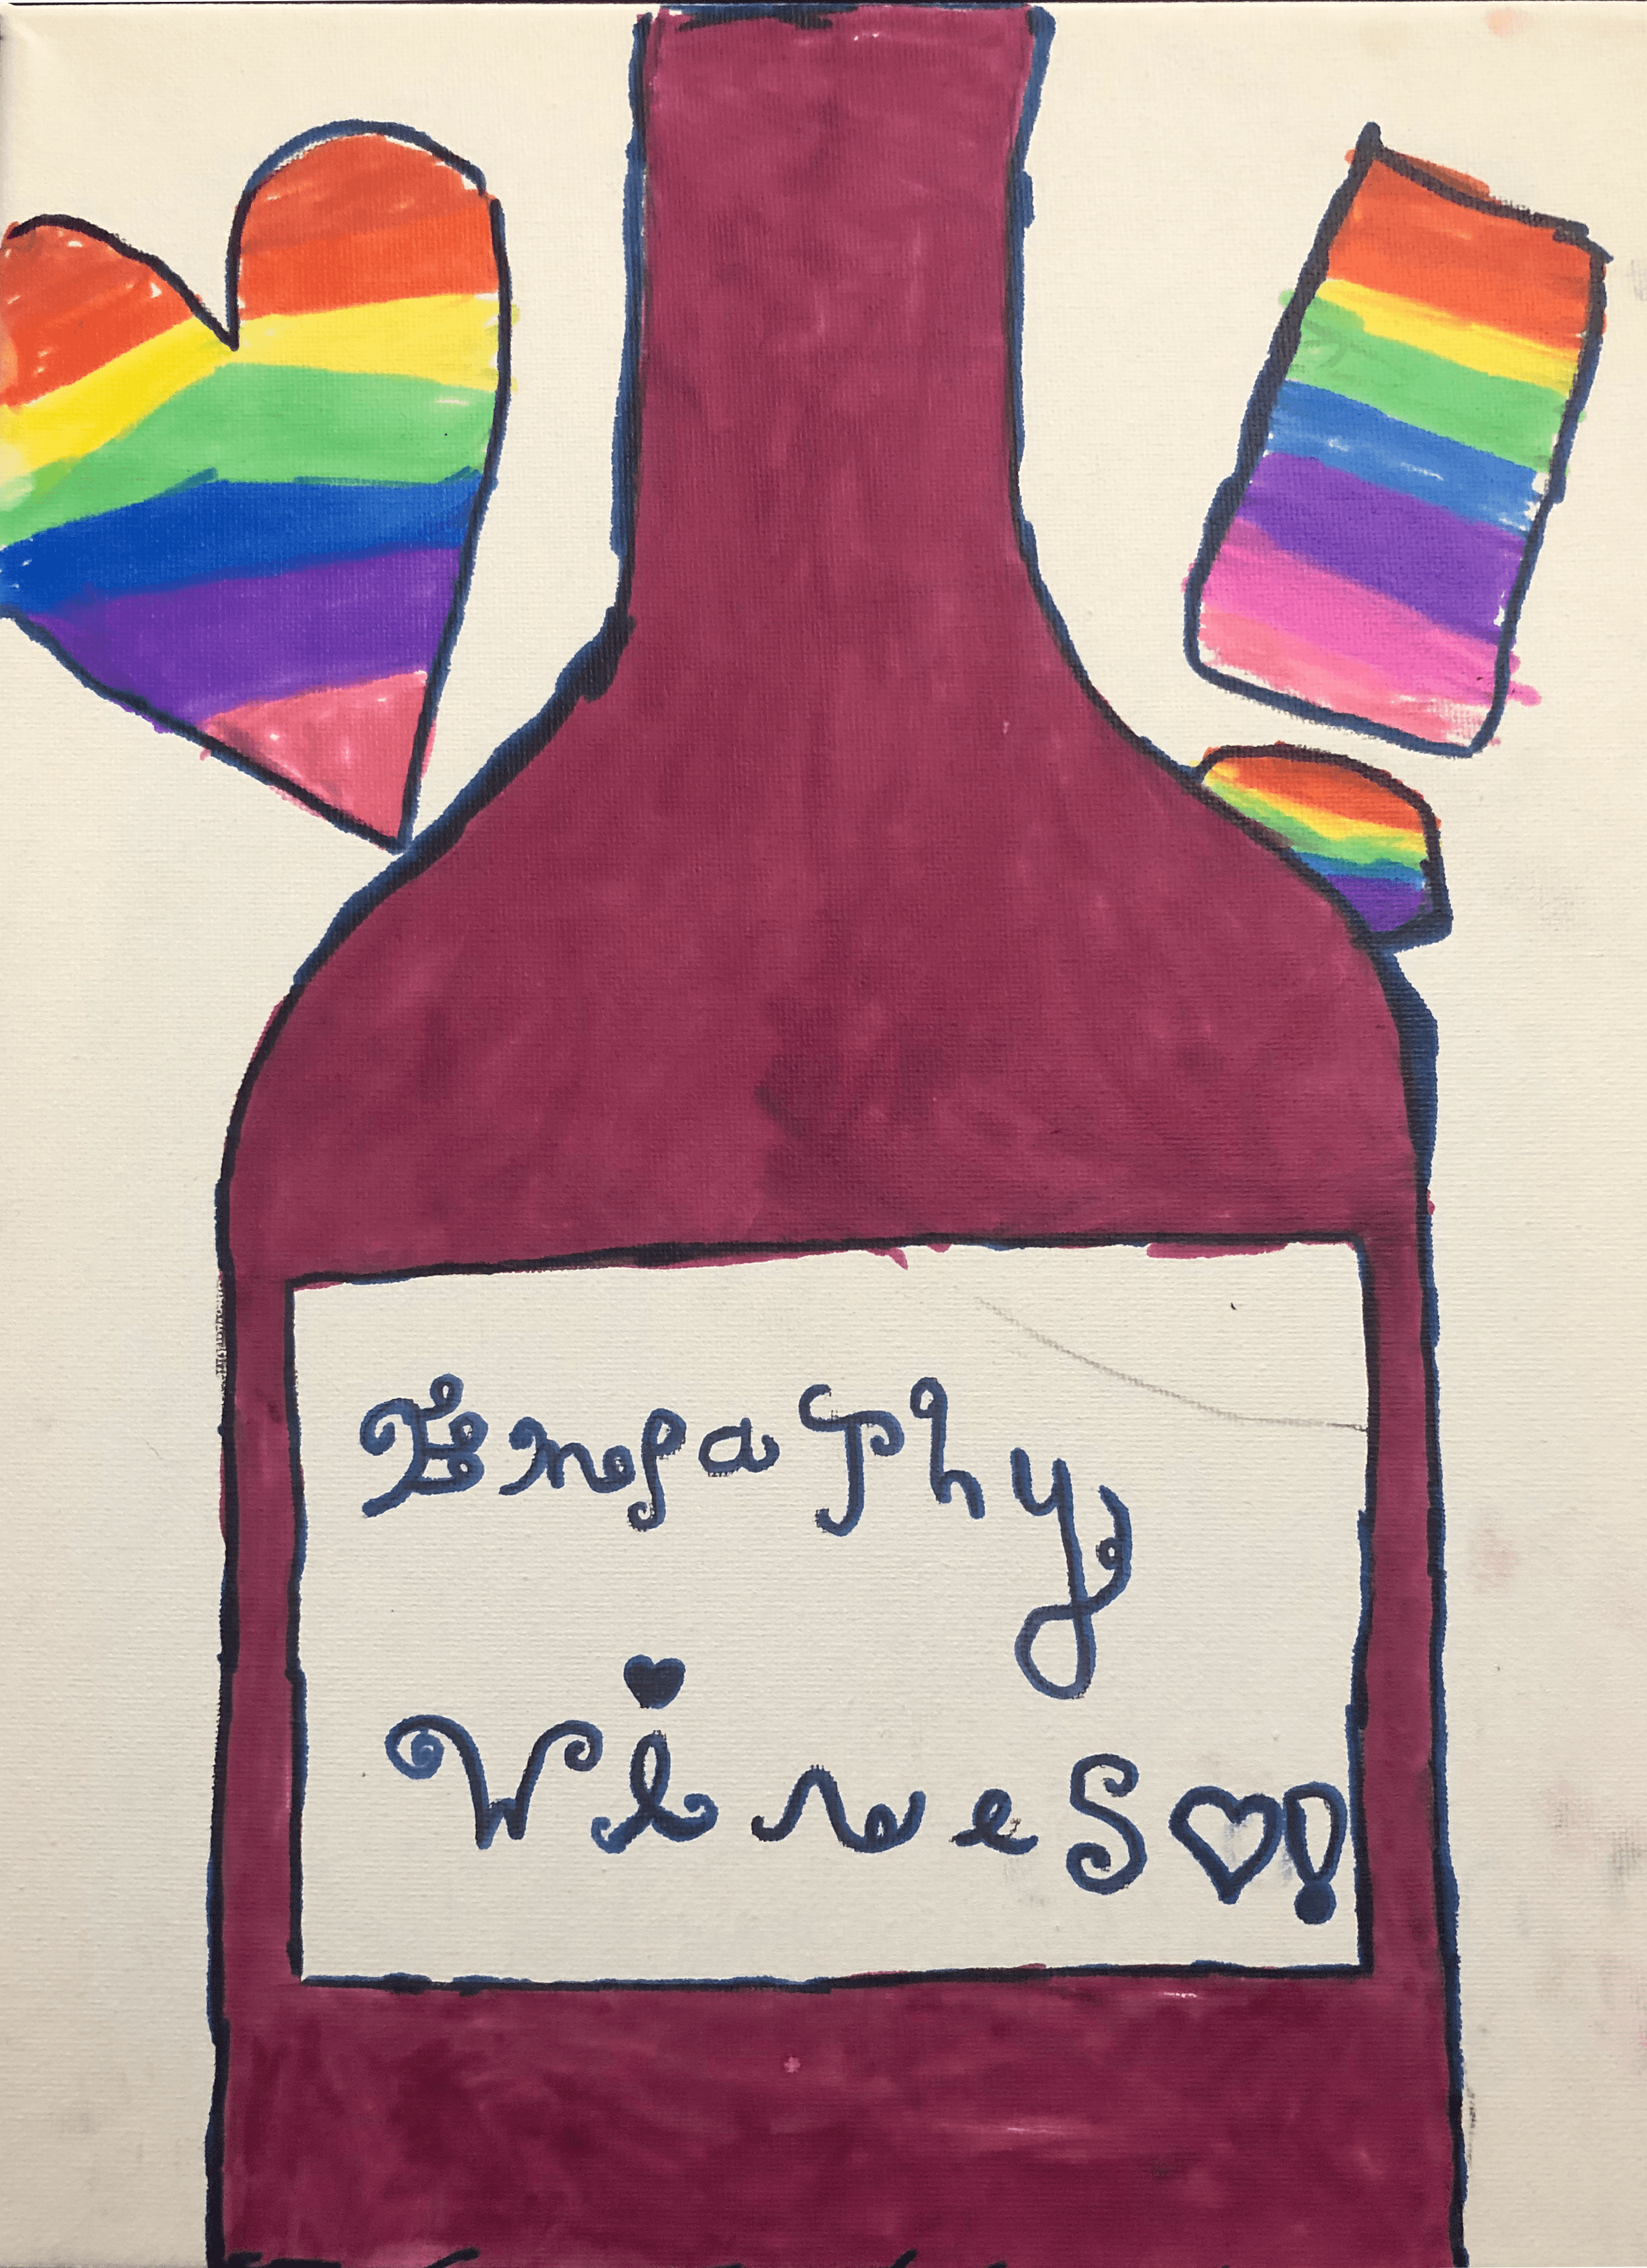 Empathy Wines Painting NYC 2019 by Logan Cimins 